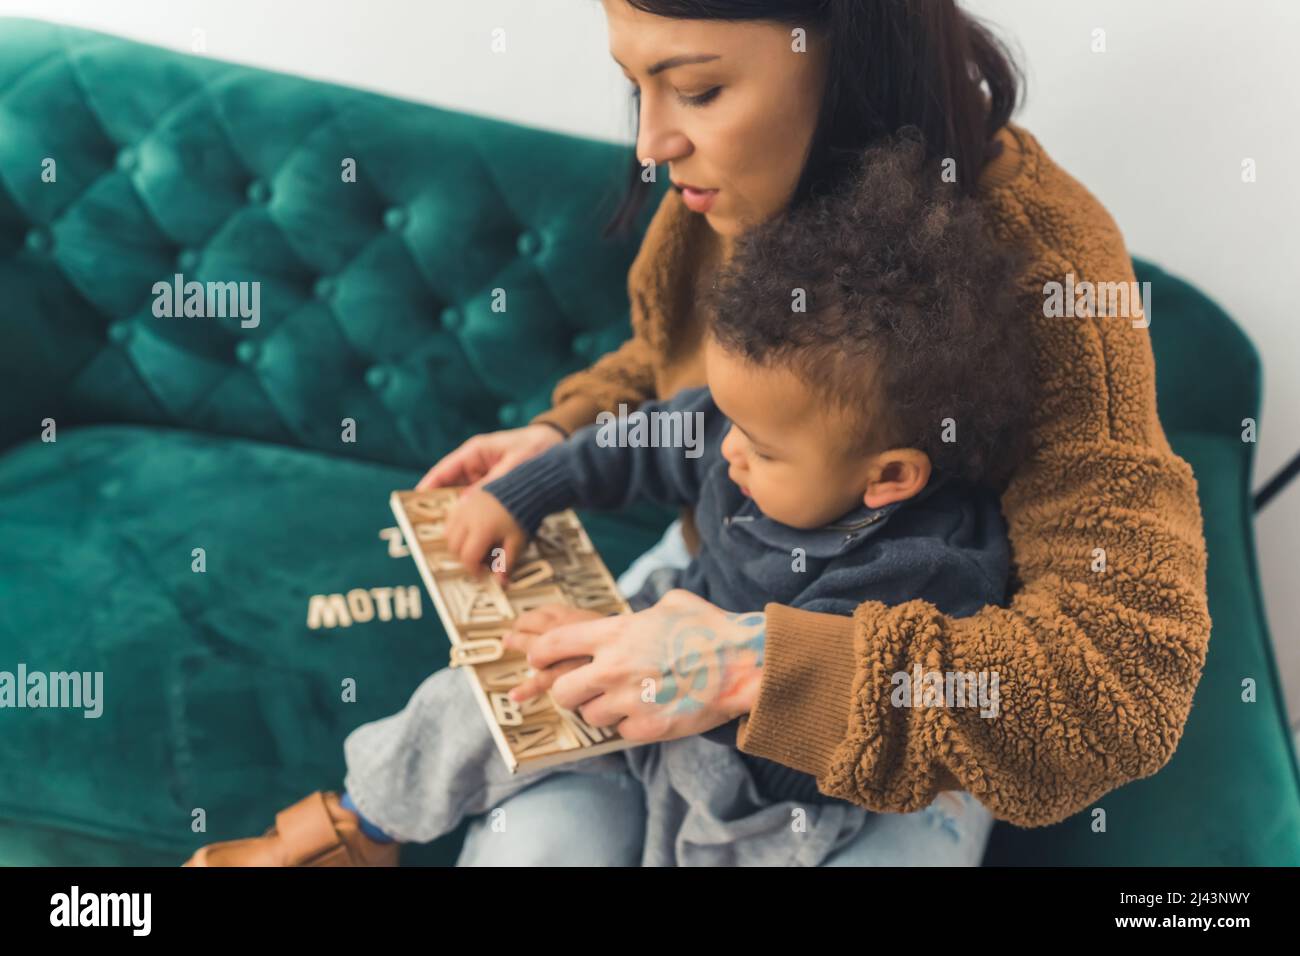 lovely curled little boy sitting in his mother's lap who is sitting on the green sofa and looking at something with his mother medium full shot indoor copy space. High quality photo Stock Photo